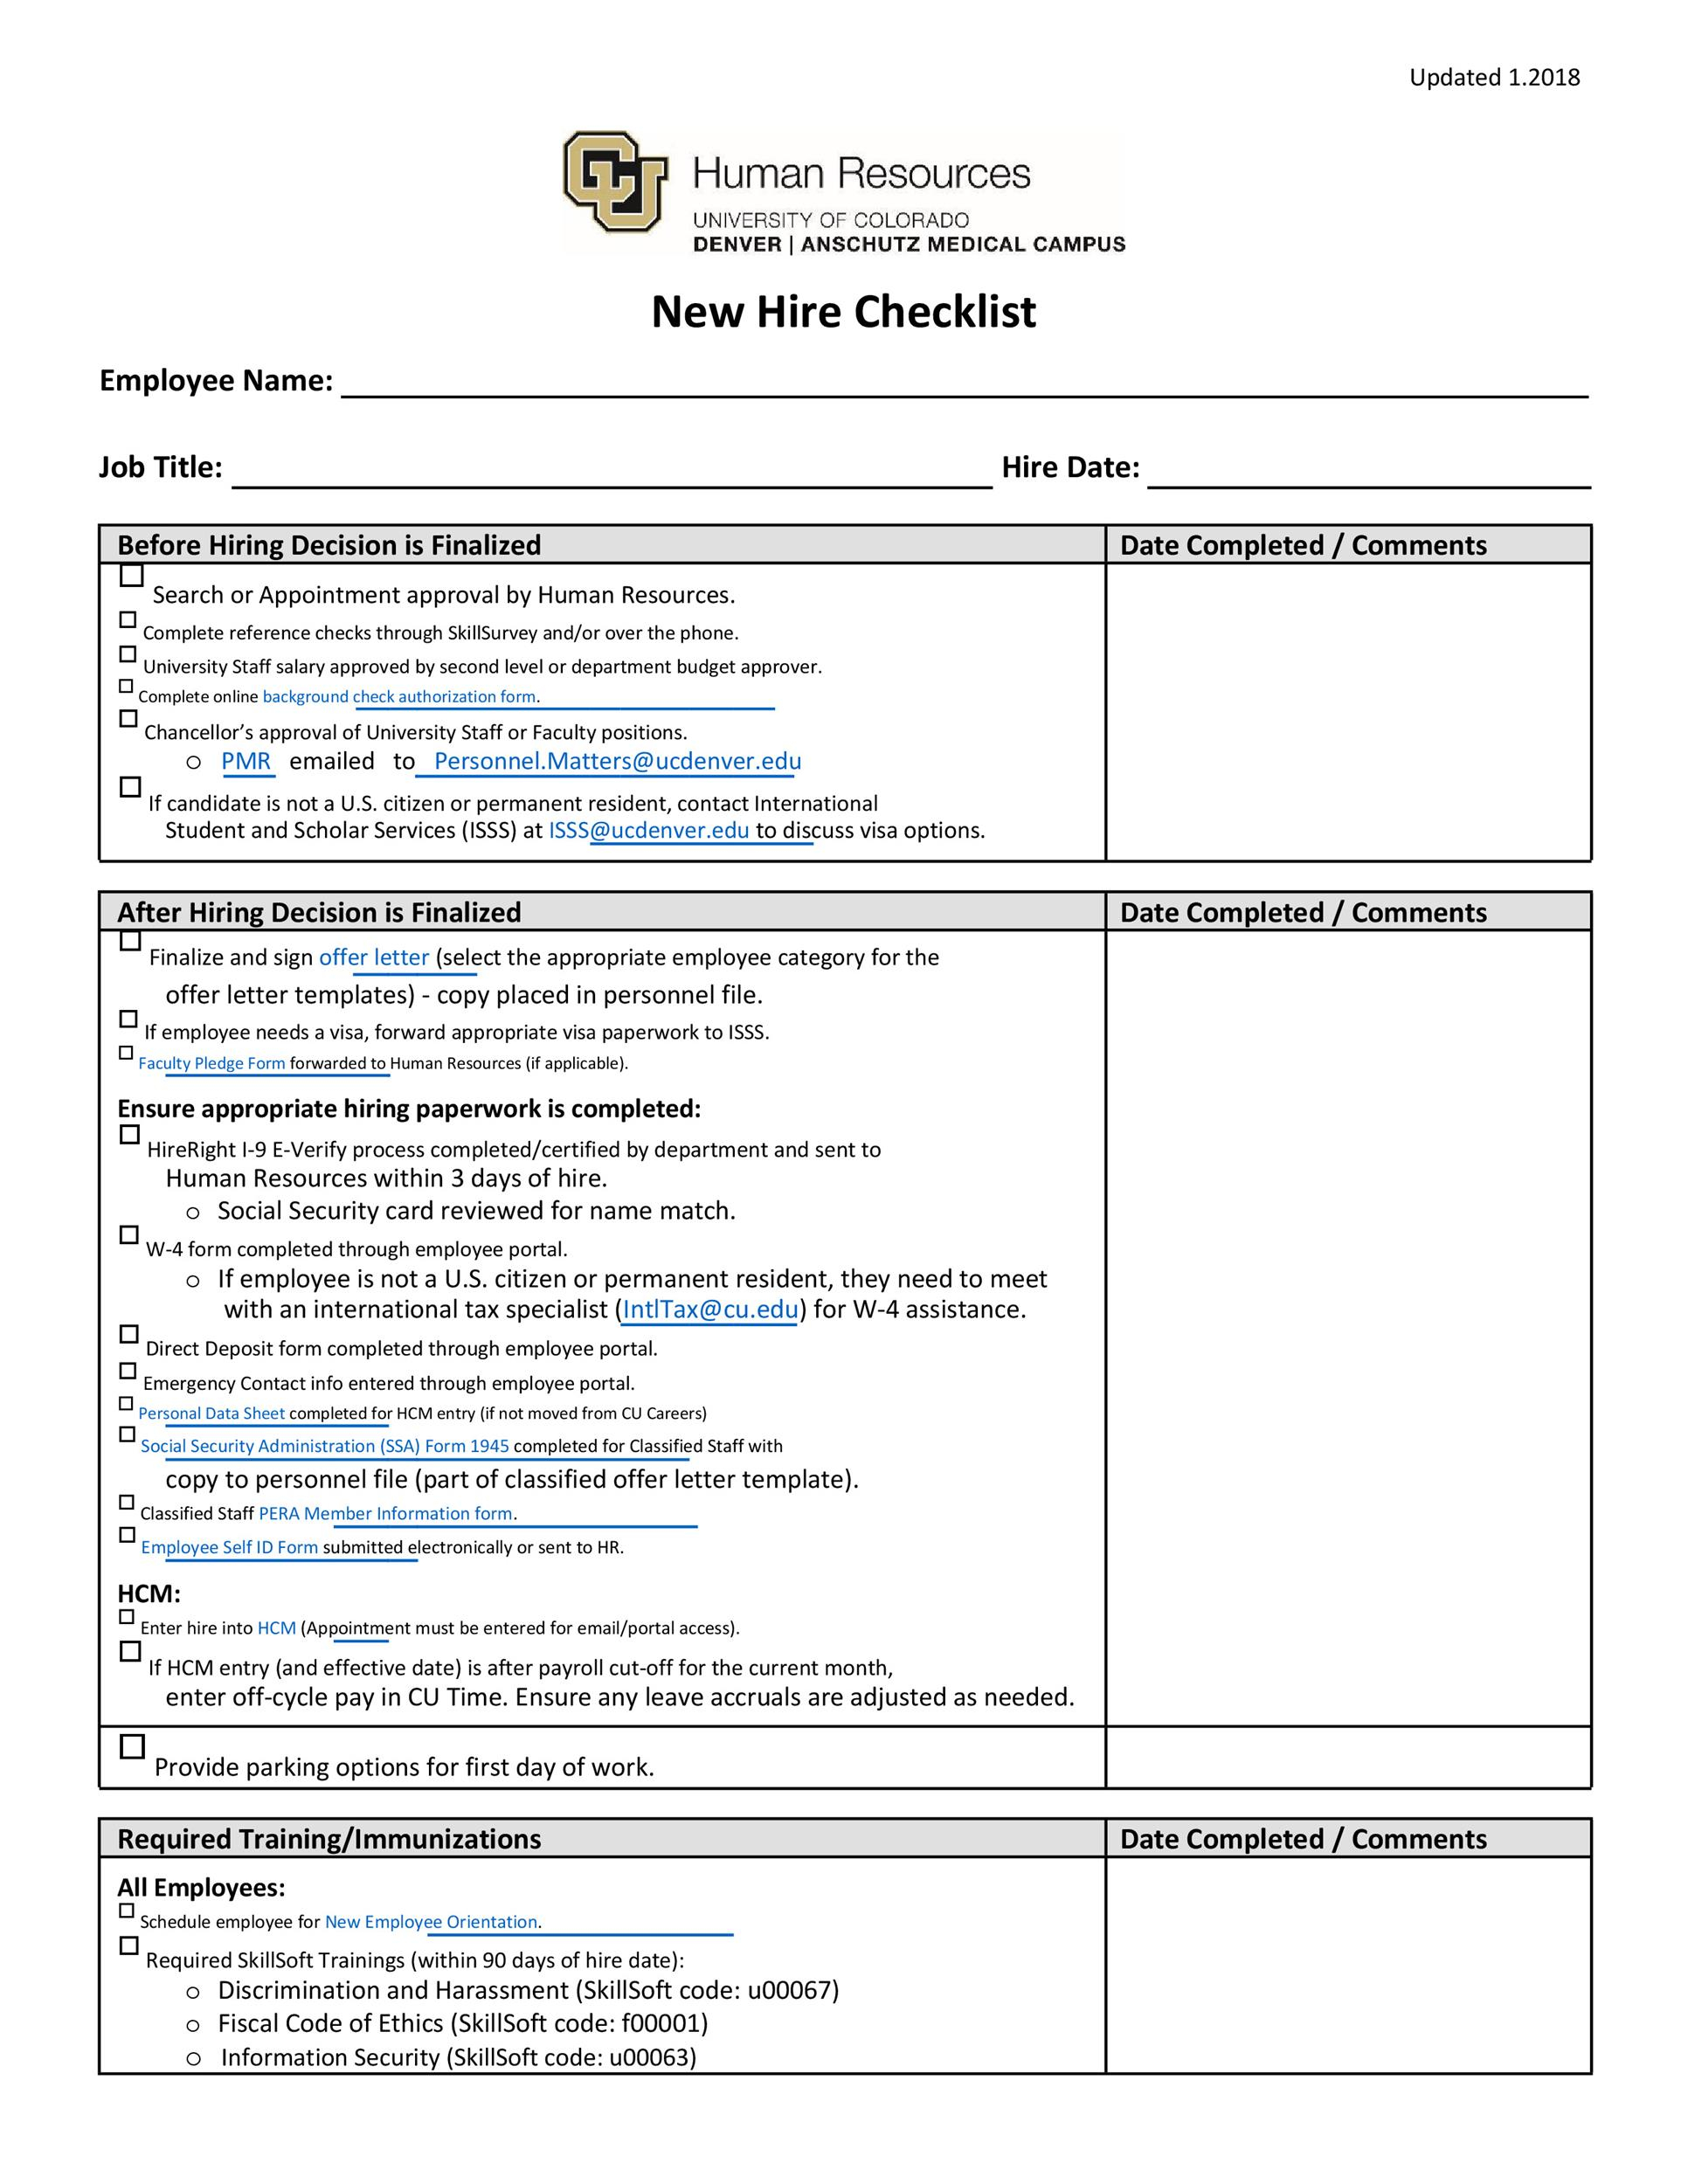 10 Useful New Hire Checklist Templates & Forms ᐅ TemplateLab Inside Orientation Checklist Template For New Employee Regarding Orientation Checklist Template For New Employee